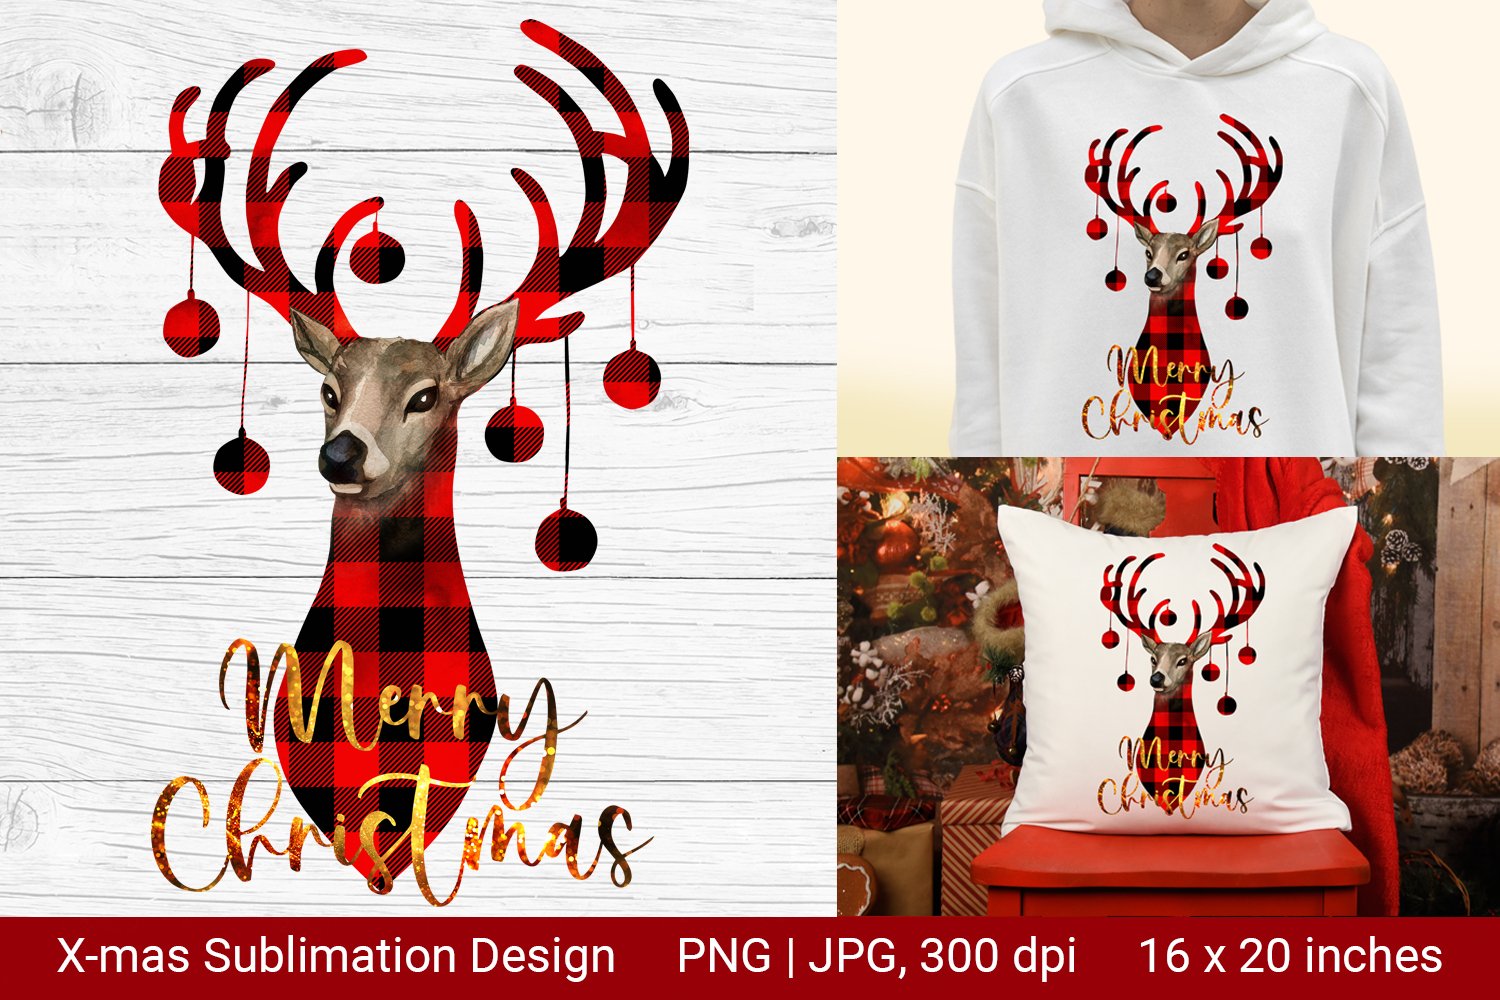 Collection of adorable images of Christmas deer in red color.